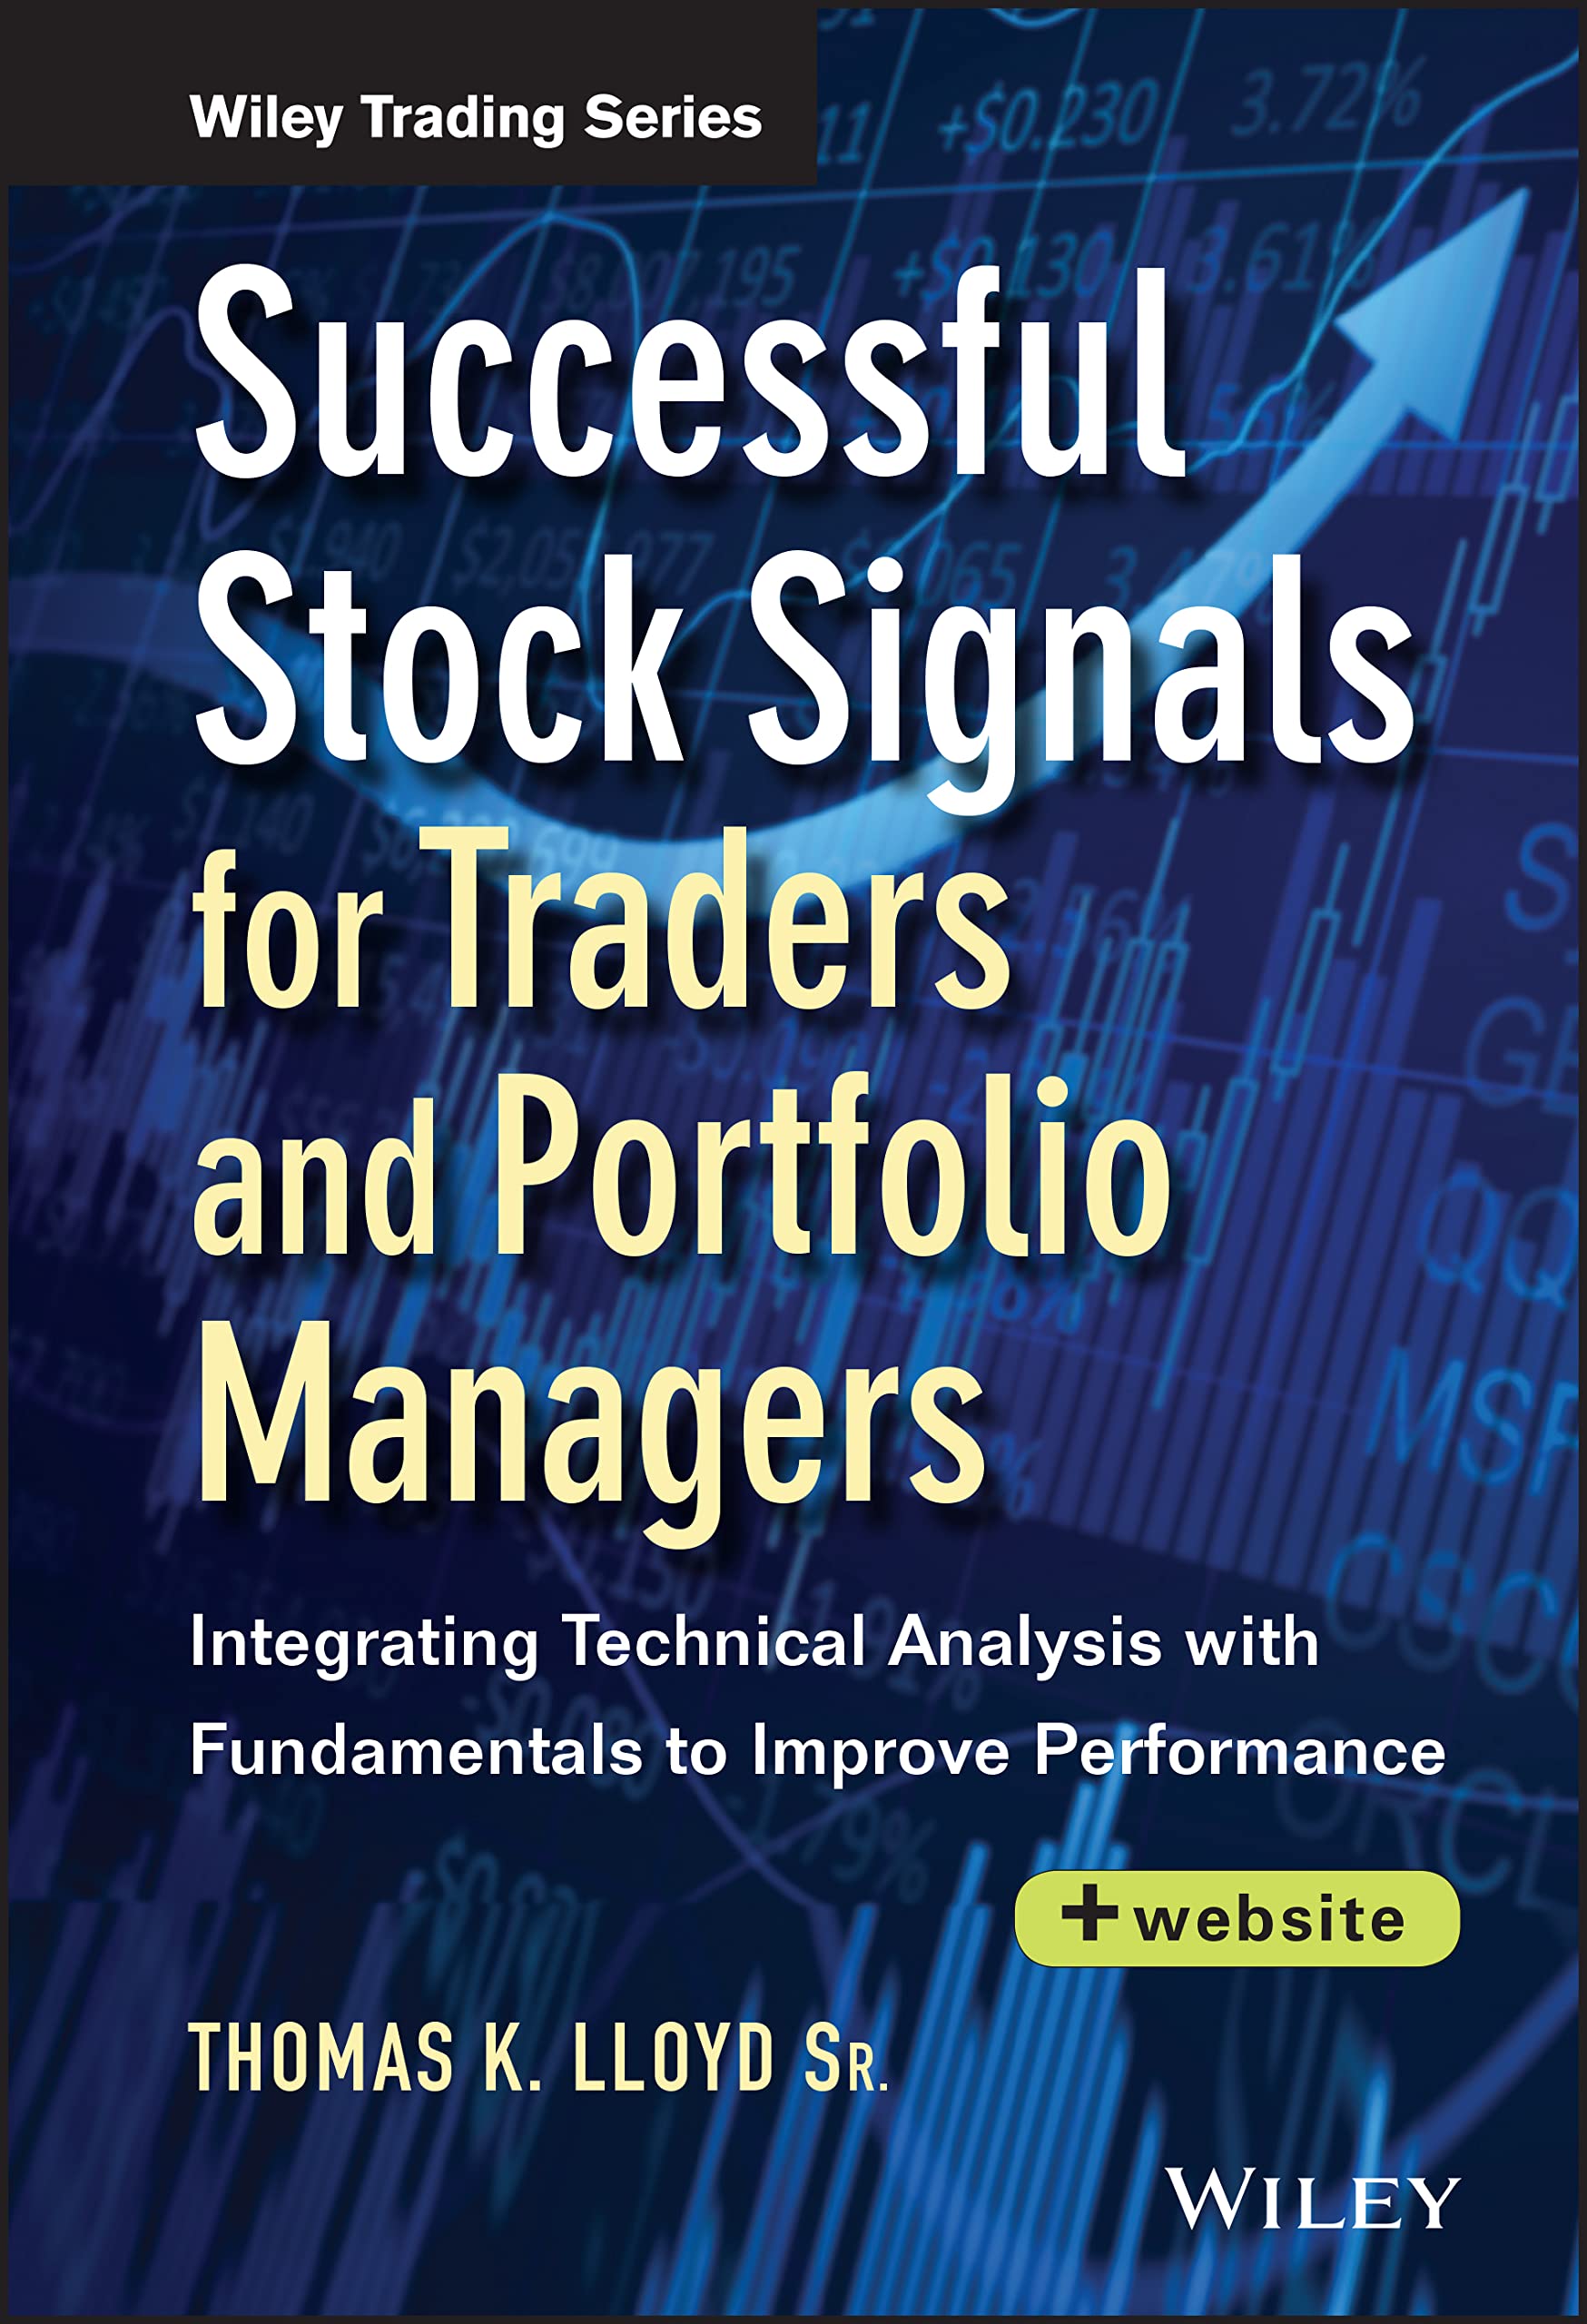 Successful Stock Signals for Traders and Portfolio Managers: Integrating Technical Analysis with Fundamentals to Improve Performance